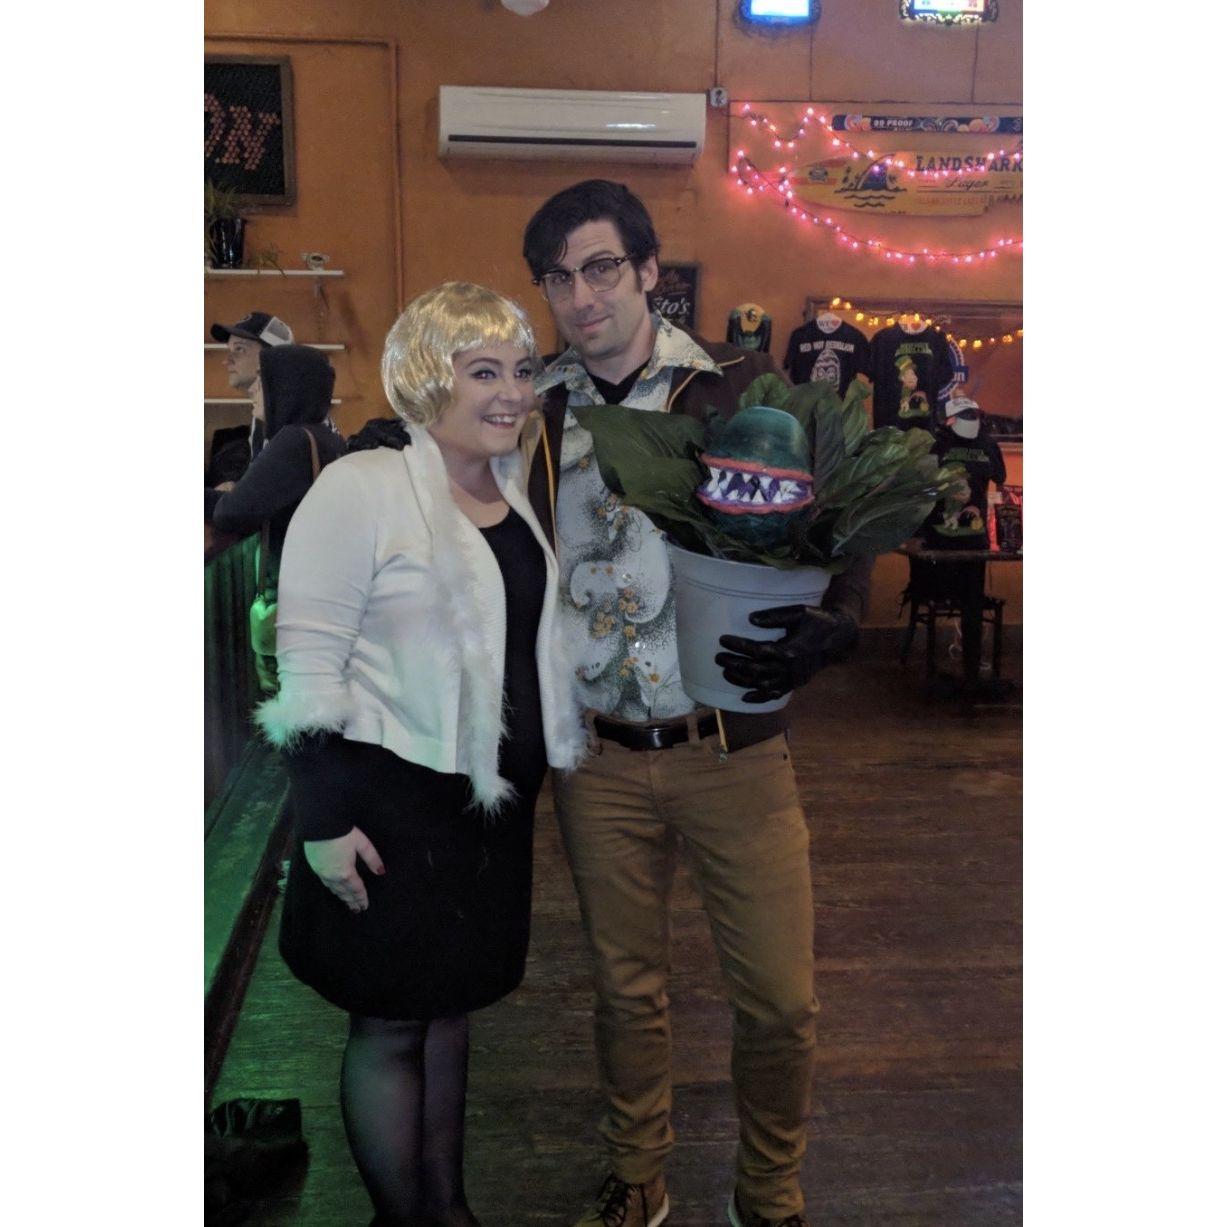 Halloween Costumes: Audrey & Seymour from "Little Shop of Horrors" (October 2018)